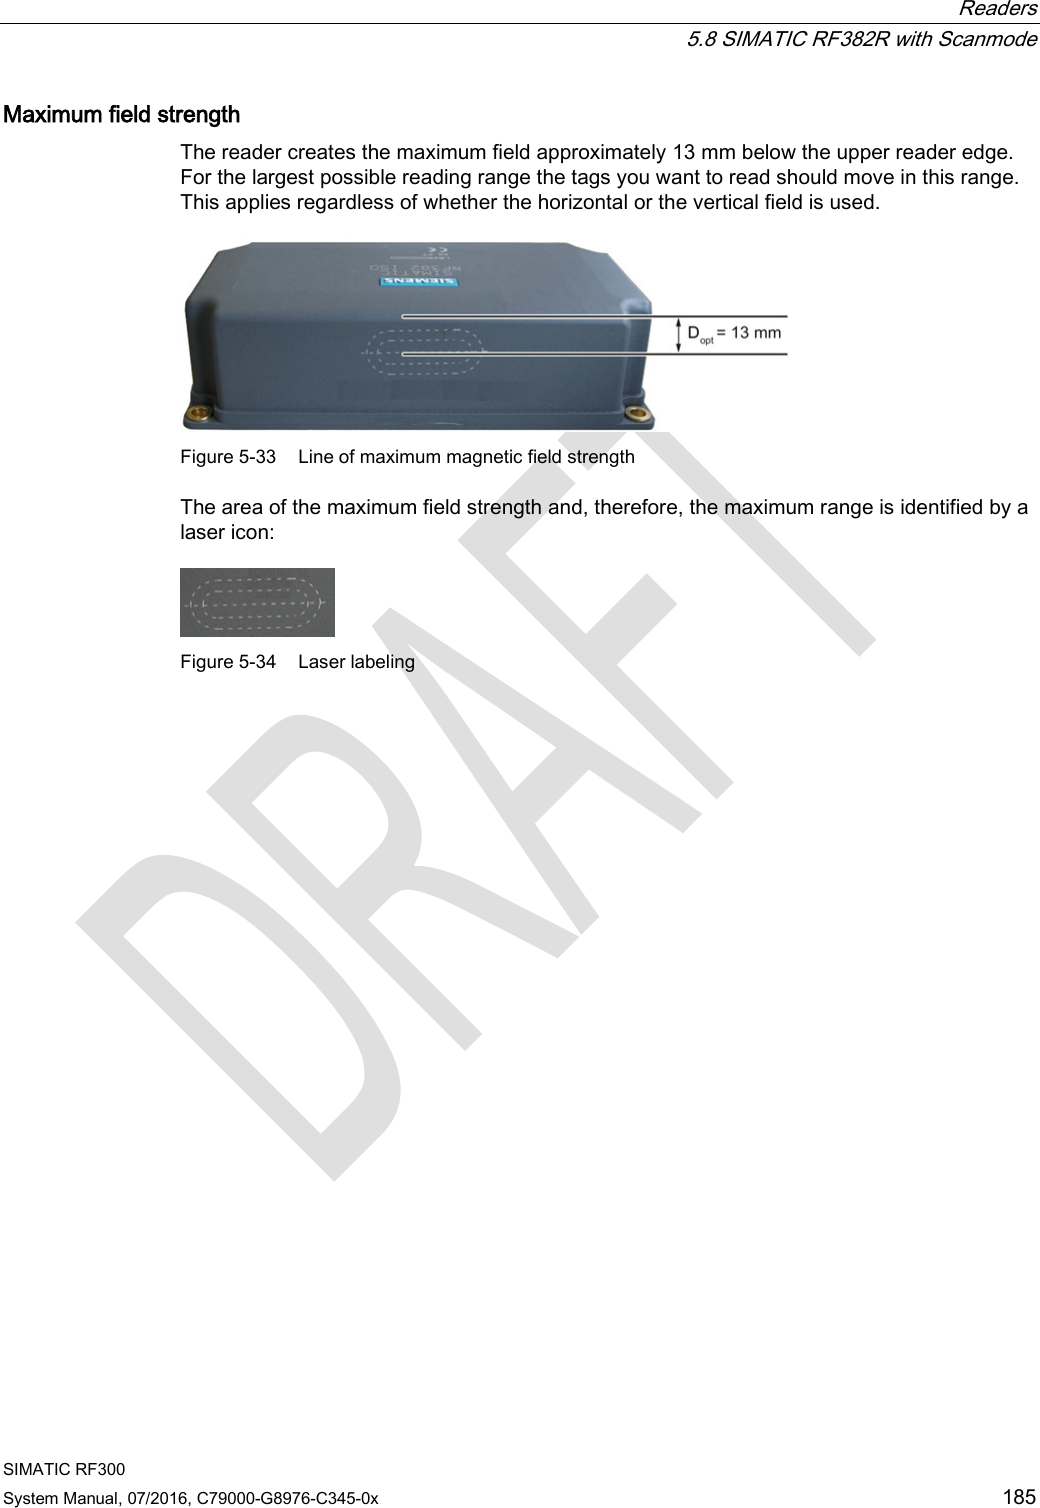  Readers  5.8 SIMATIC RF382R with Scanmode SIMATIC RF300 System Manual, 07/2016, C79000-G8976-C345-0x 185 Maximum field strength The reader creates the maximum field approximately 13 mm below the upper reader edge. For the largest possible reading range the tags you want to read should move in this range. This applies regardless of whether the horizontal or the vertical field is used.  Figure 5-33 Line of maximum magnetic field strength The area of the maximum field strength and, therefore, the maximum range is identified by a laser icon:  Figure 5-34 Laser labeling 